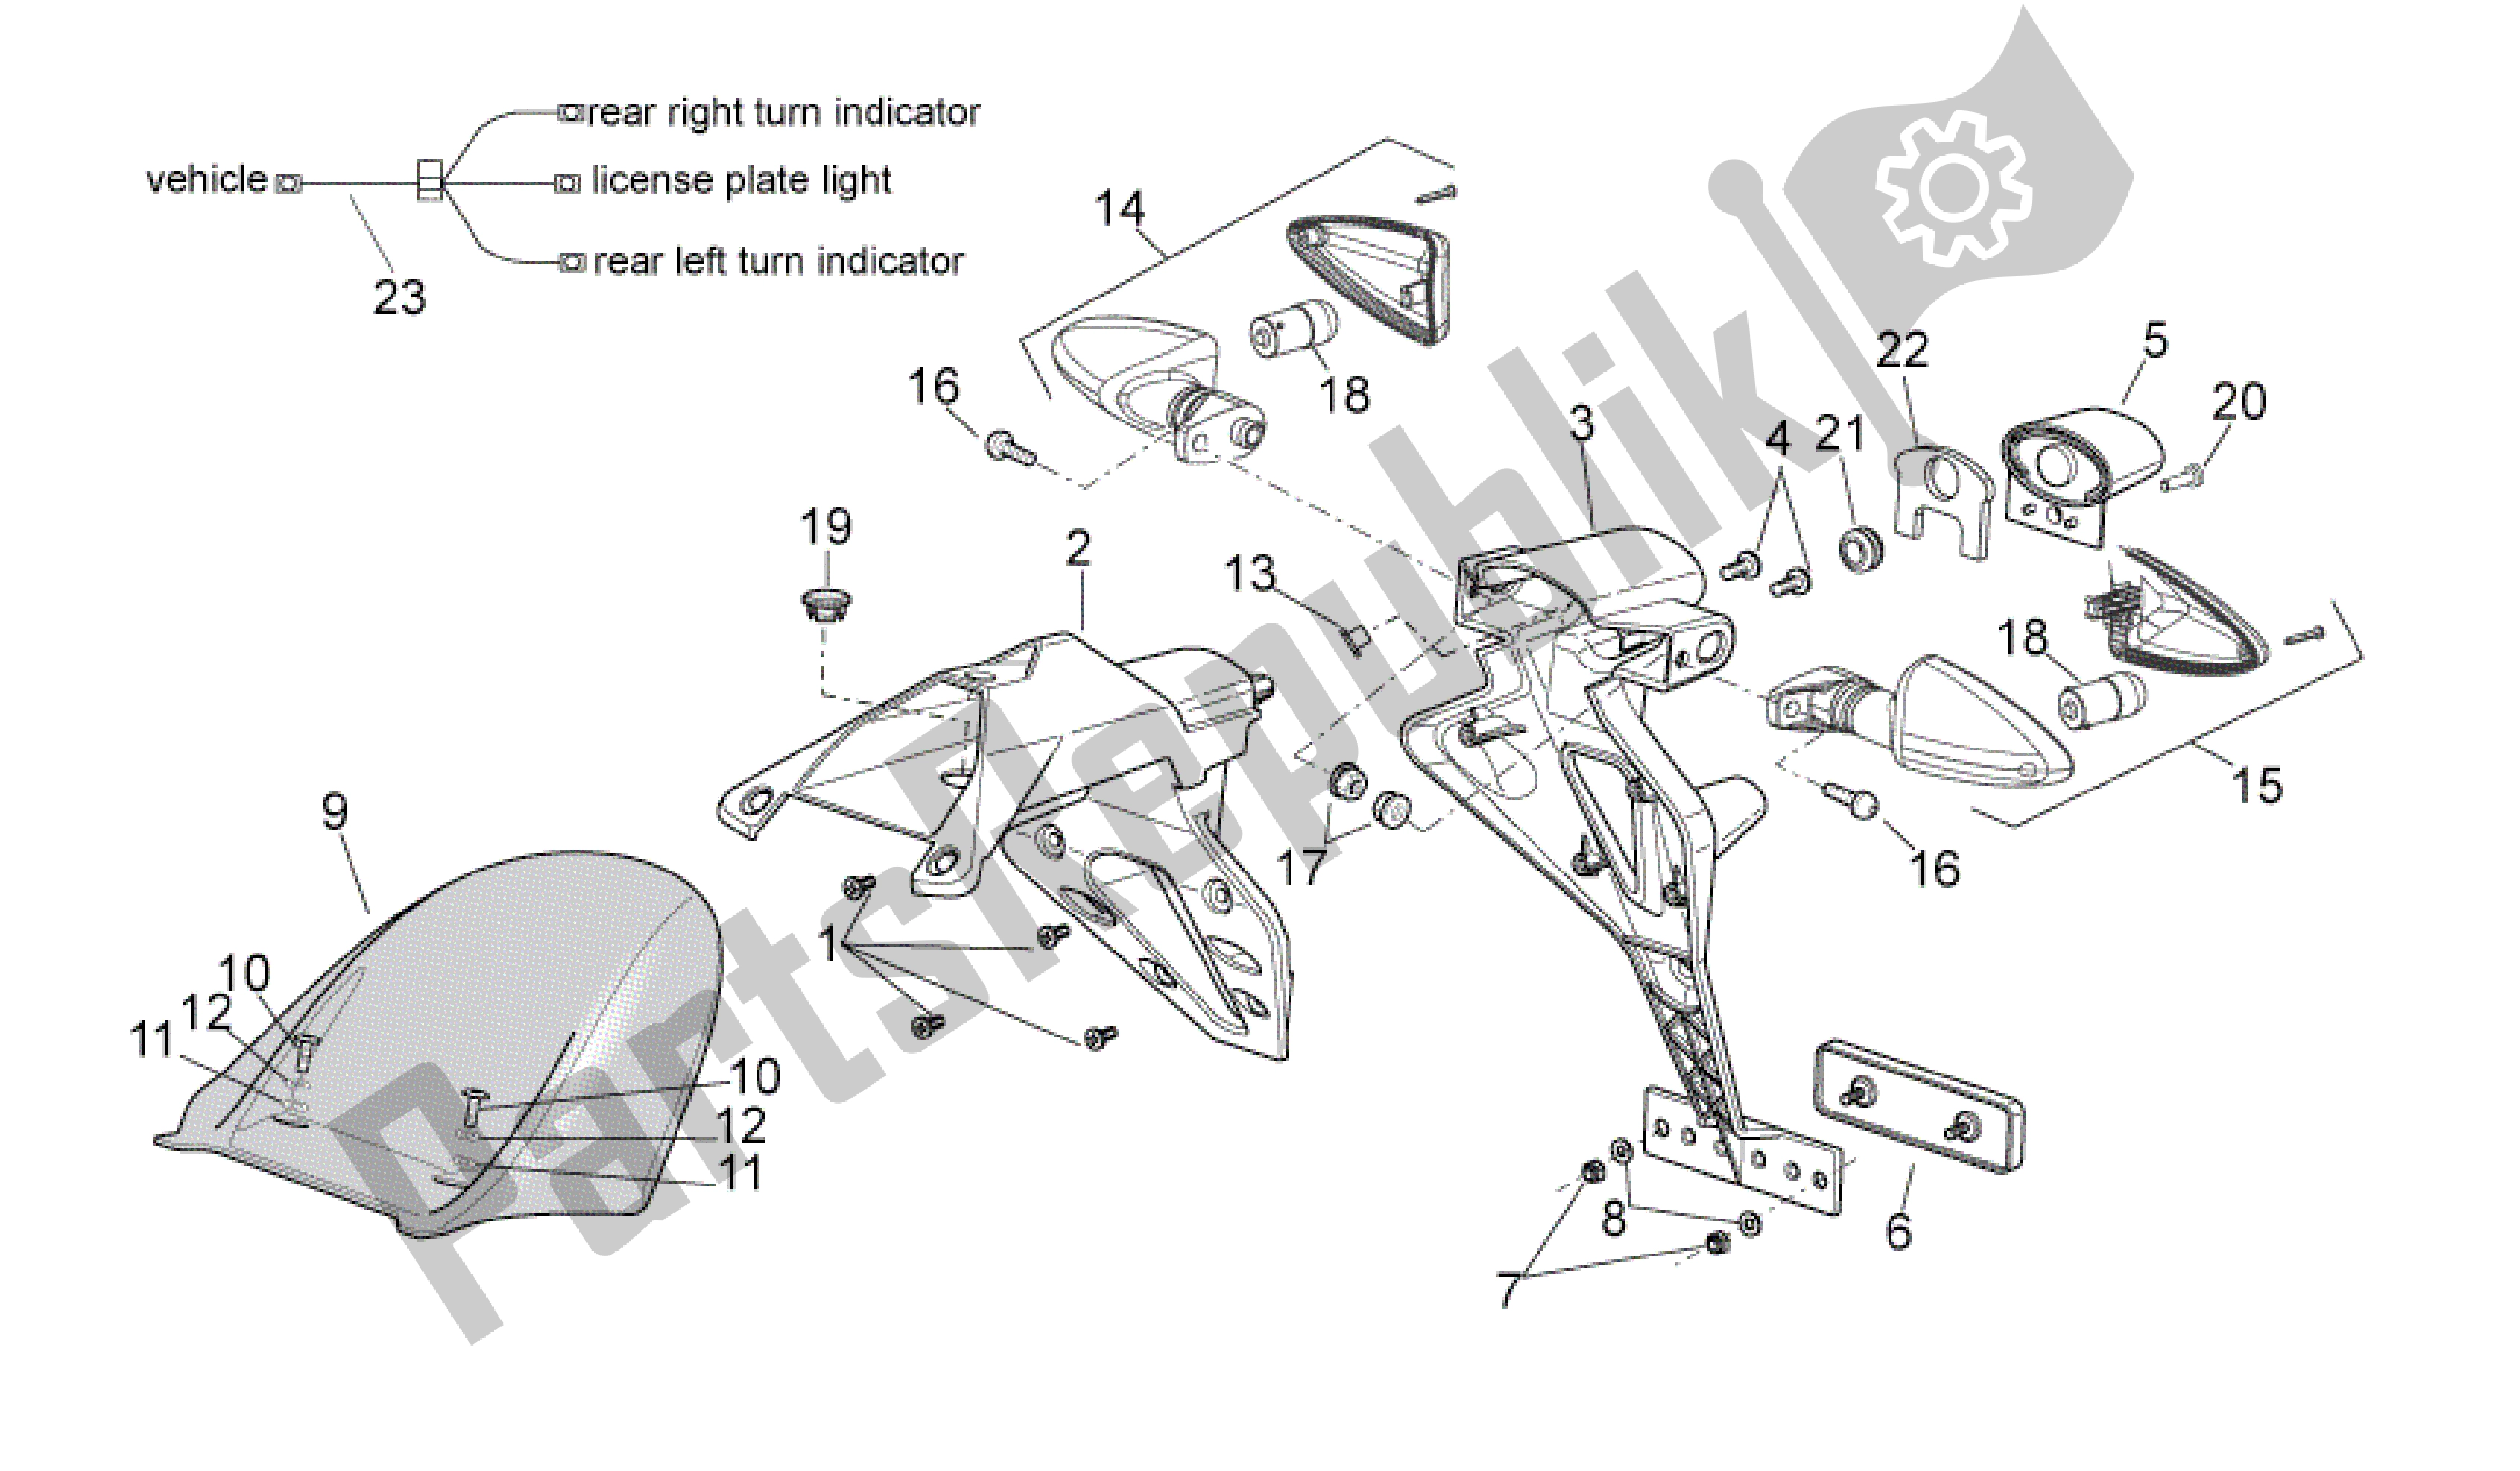 All parts for the Rear Body Ii of the Aprilia RSV4 Aprc R ABS 3984 1000 2013